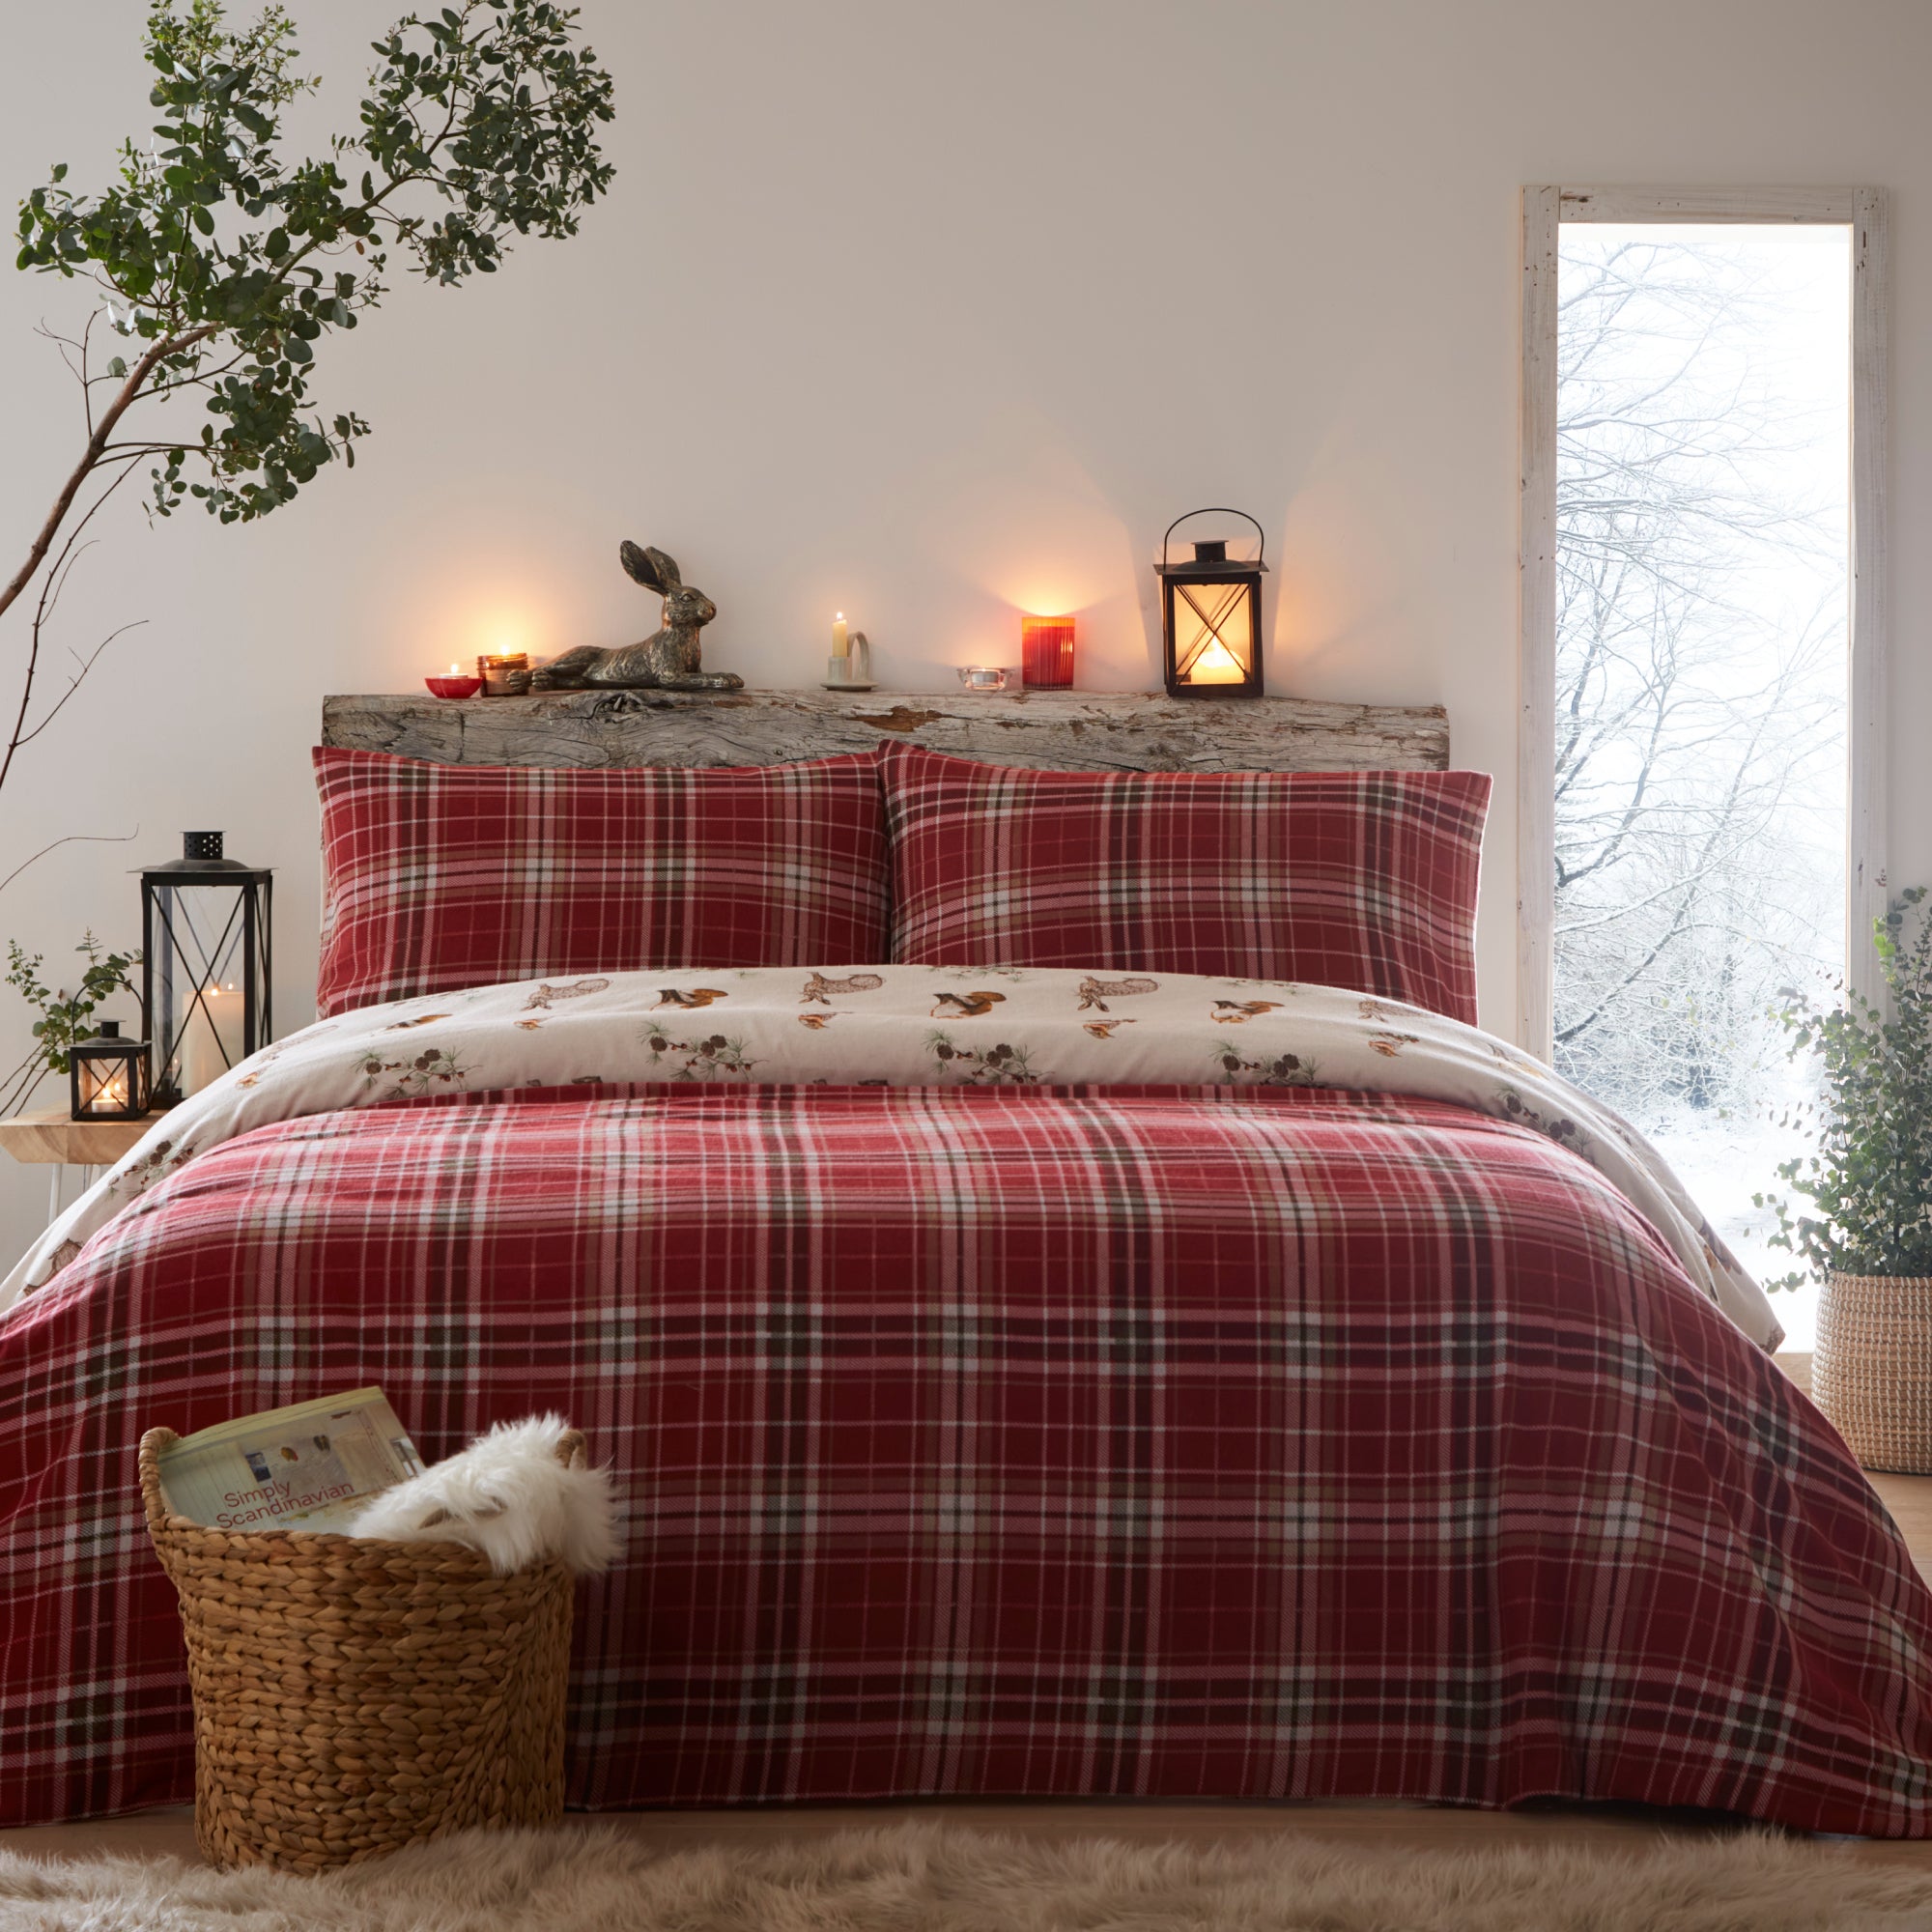 Duvet Cover Set Derwent Check by Dreams & Drapes Lodge in Natural